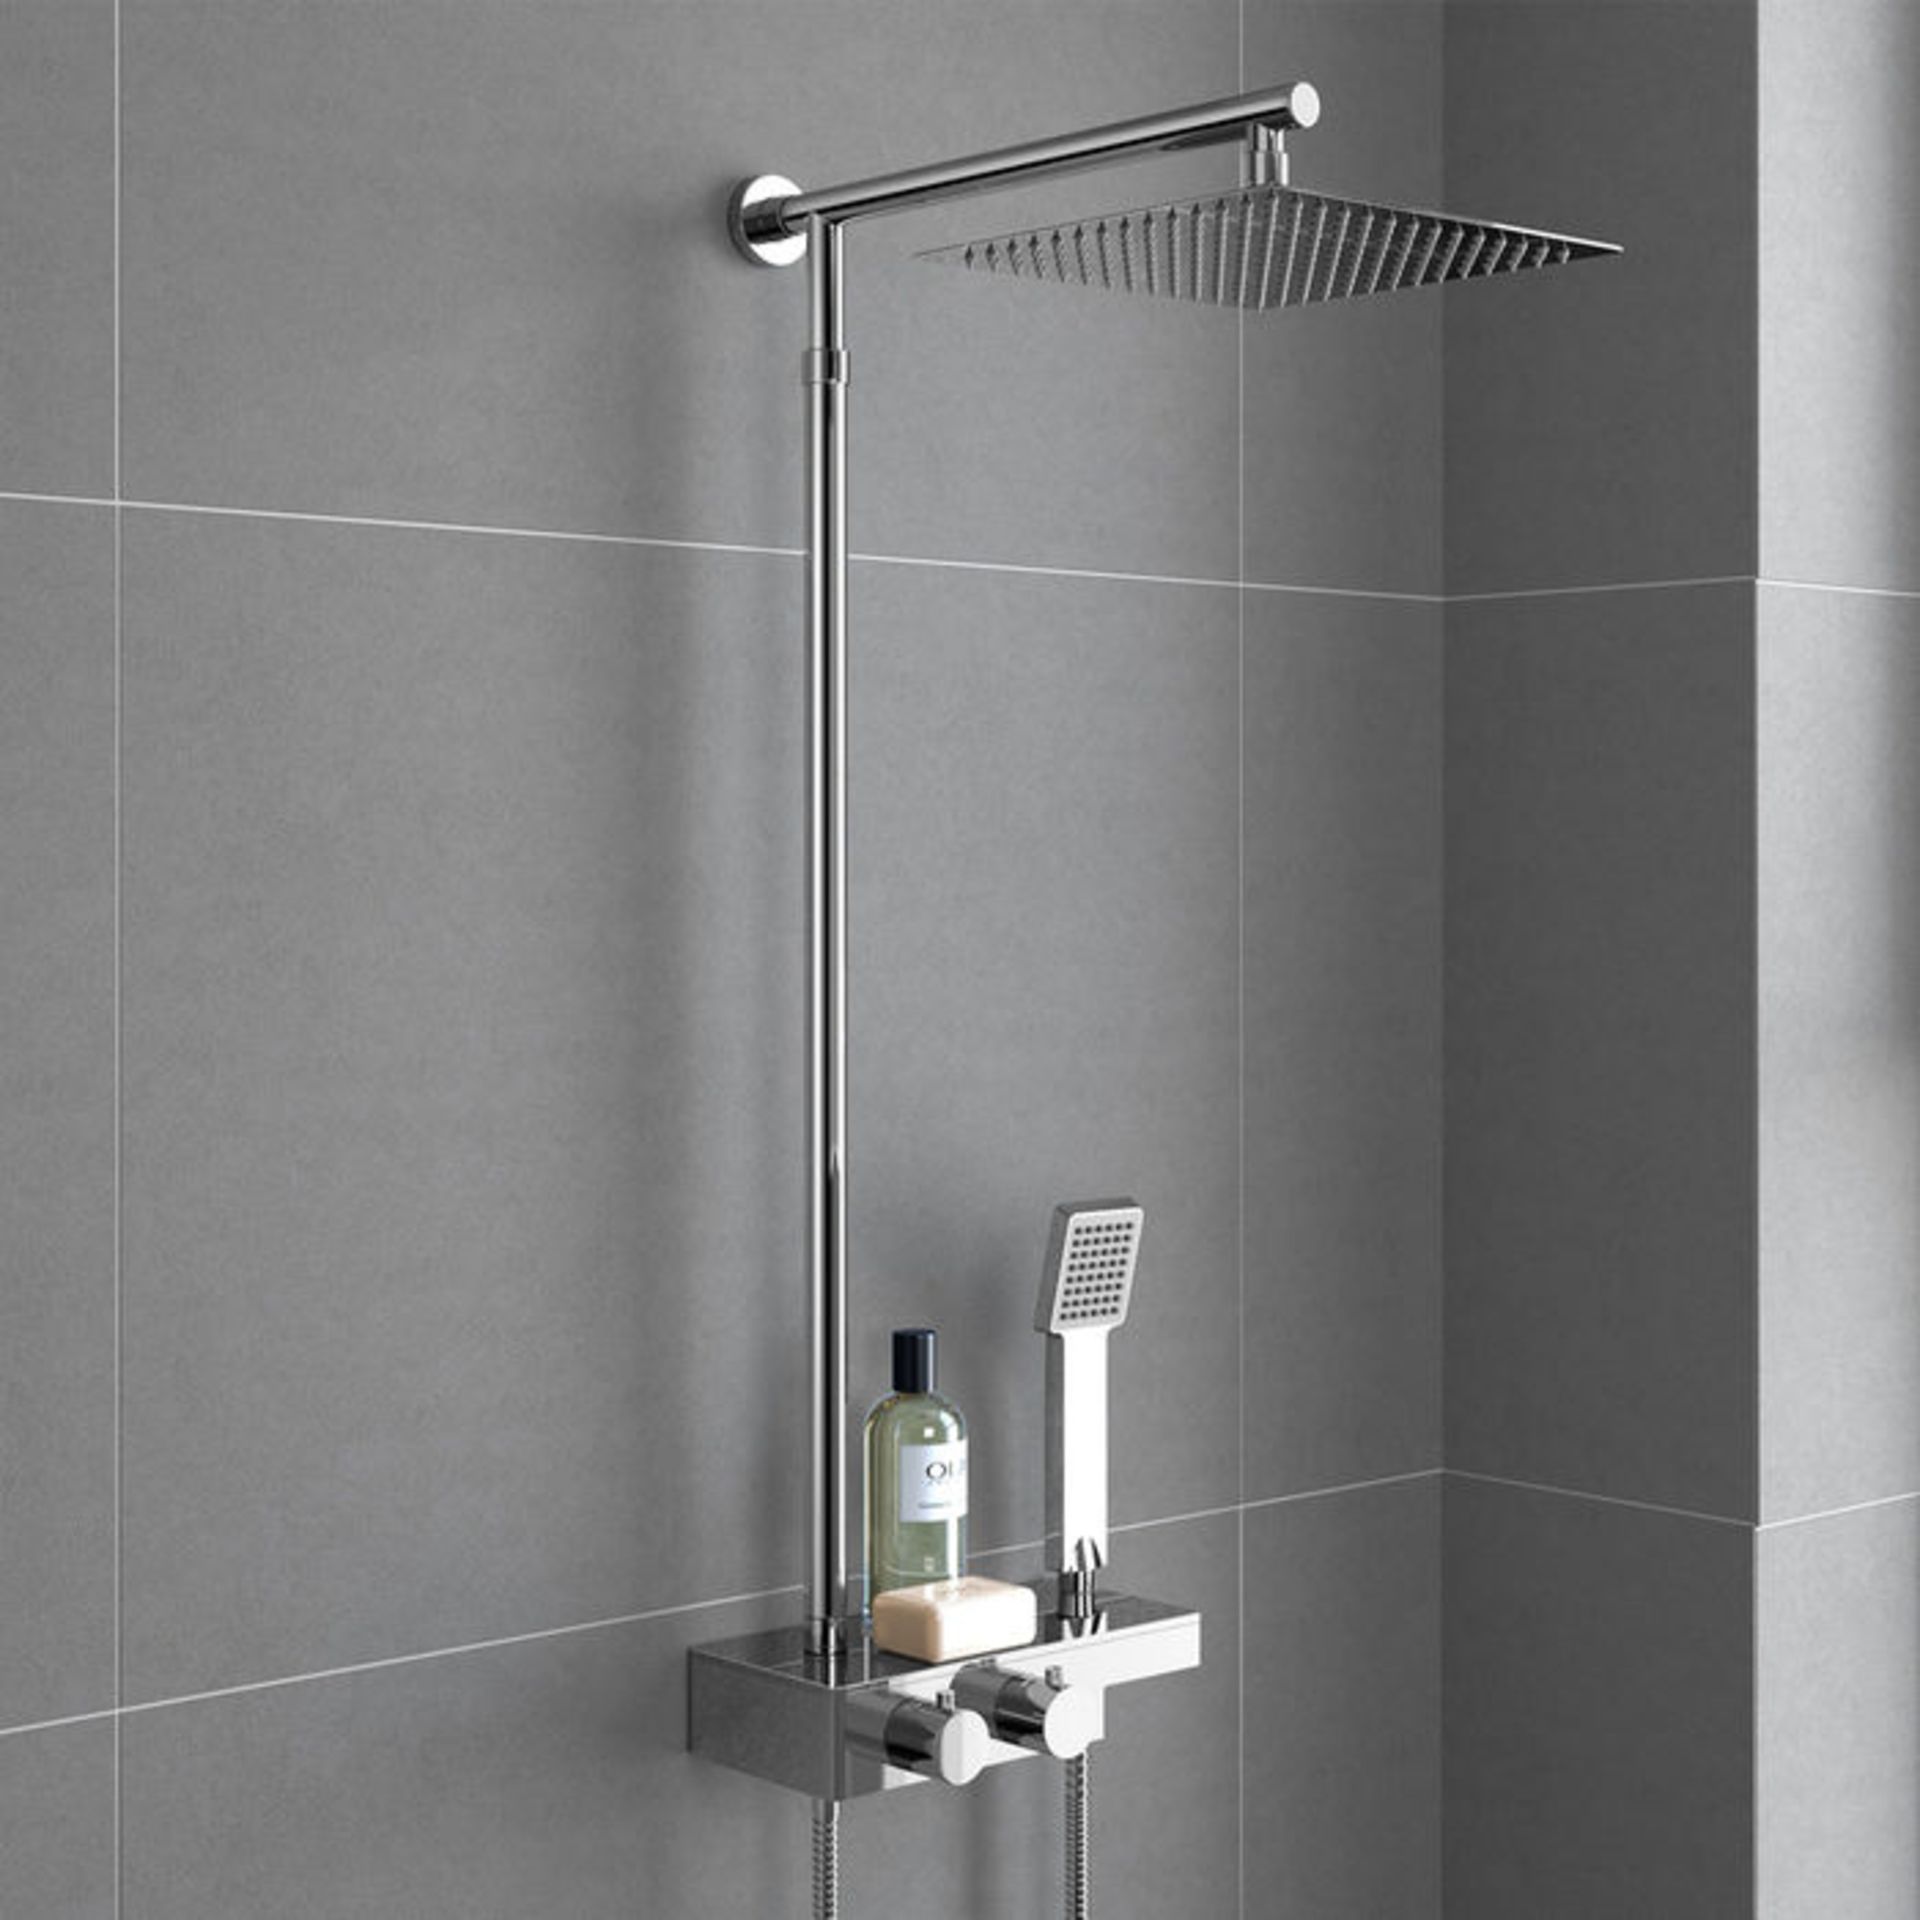 (YC31) Square Exposed Thermostatic Shower Shelf, Kit & Large Head. Style meets function with our - Image 4 of 4